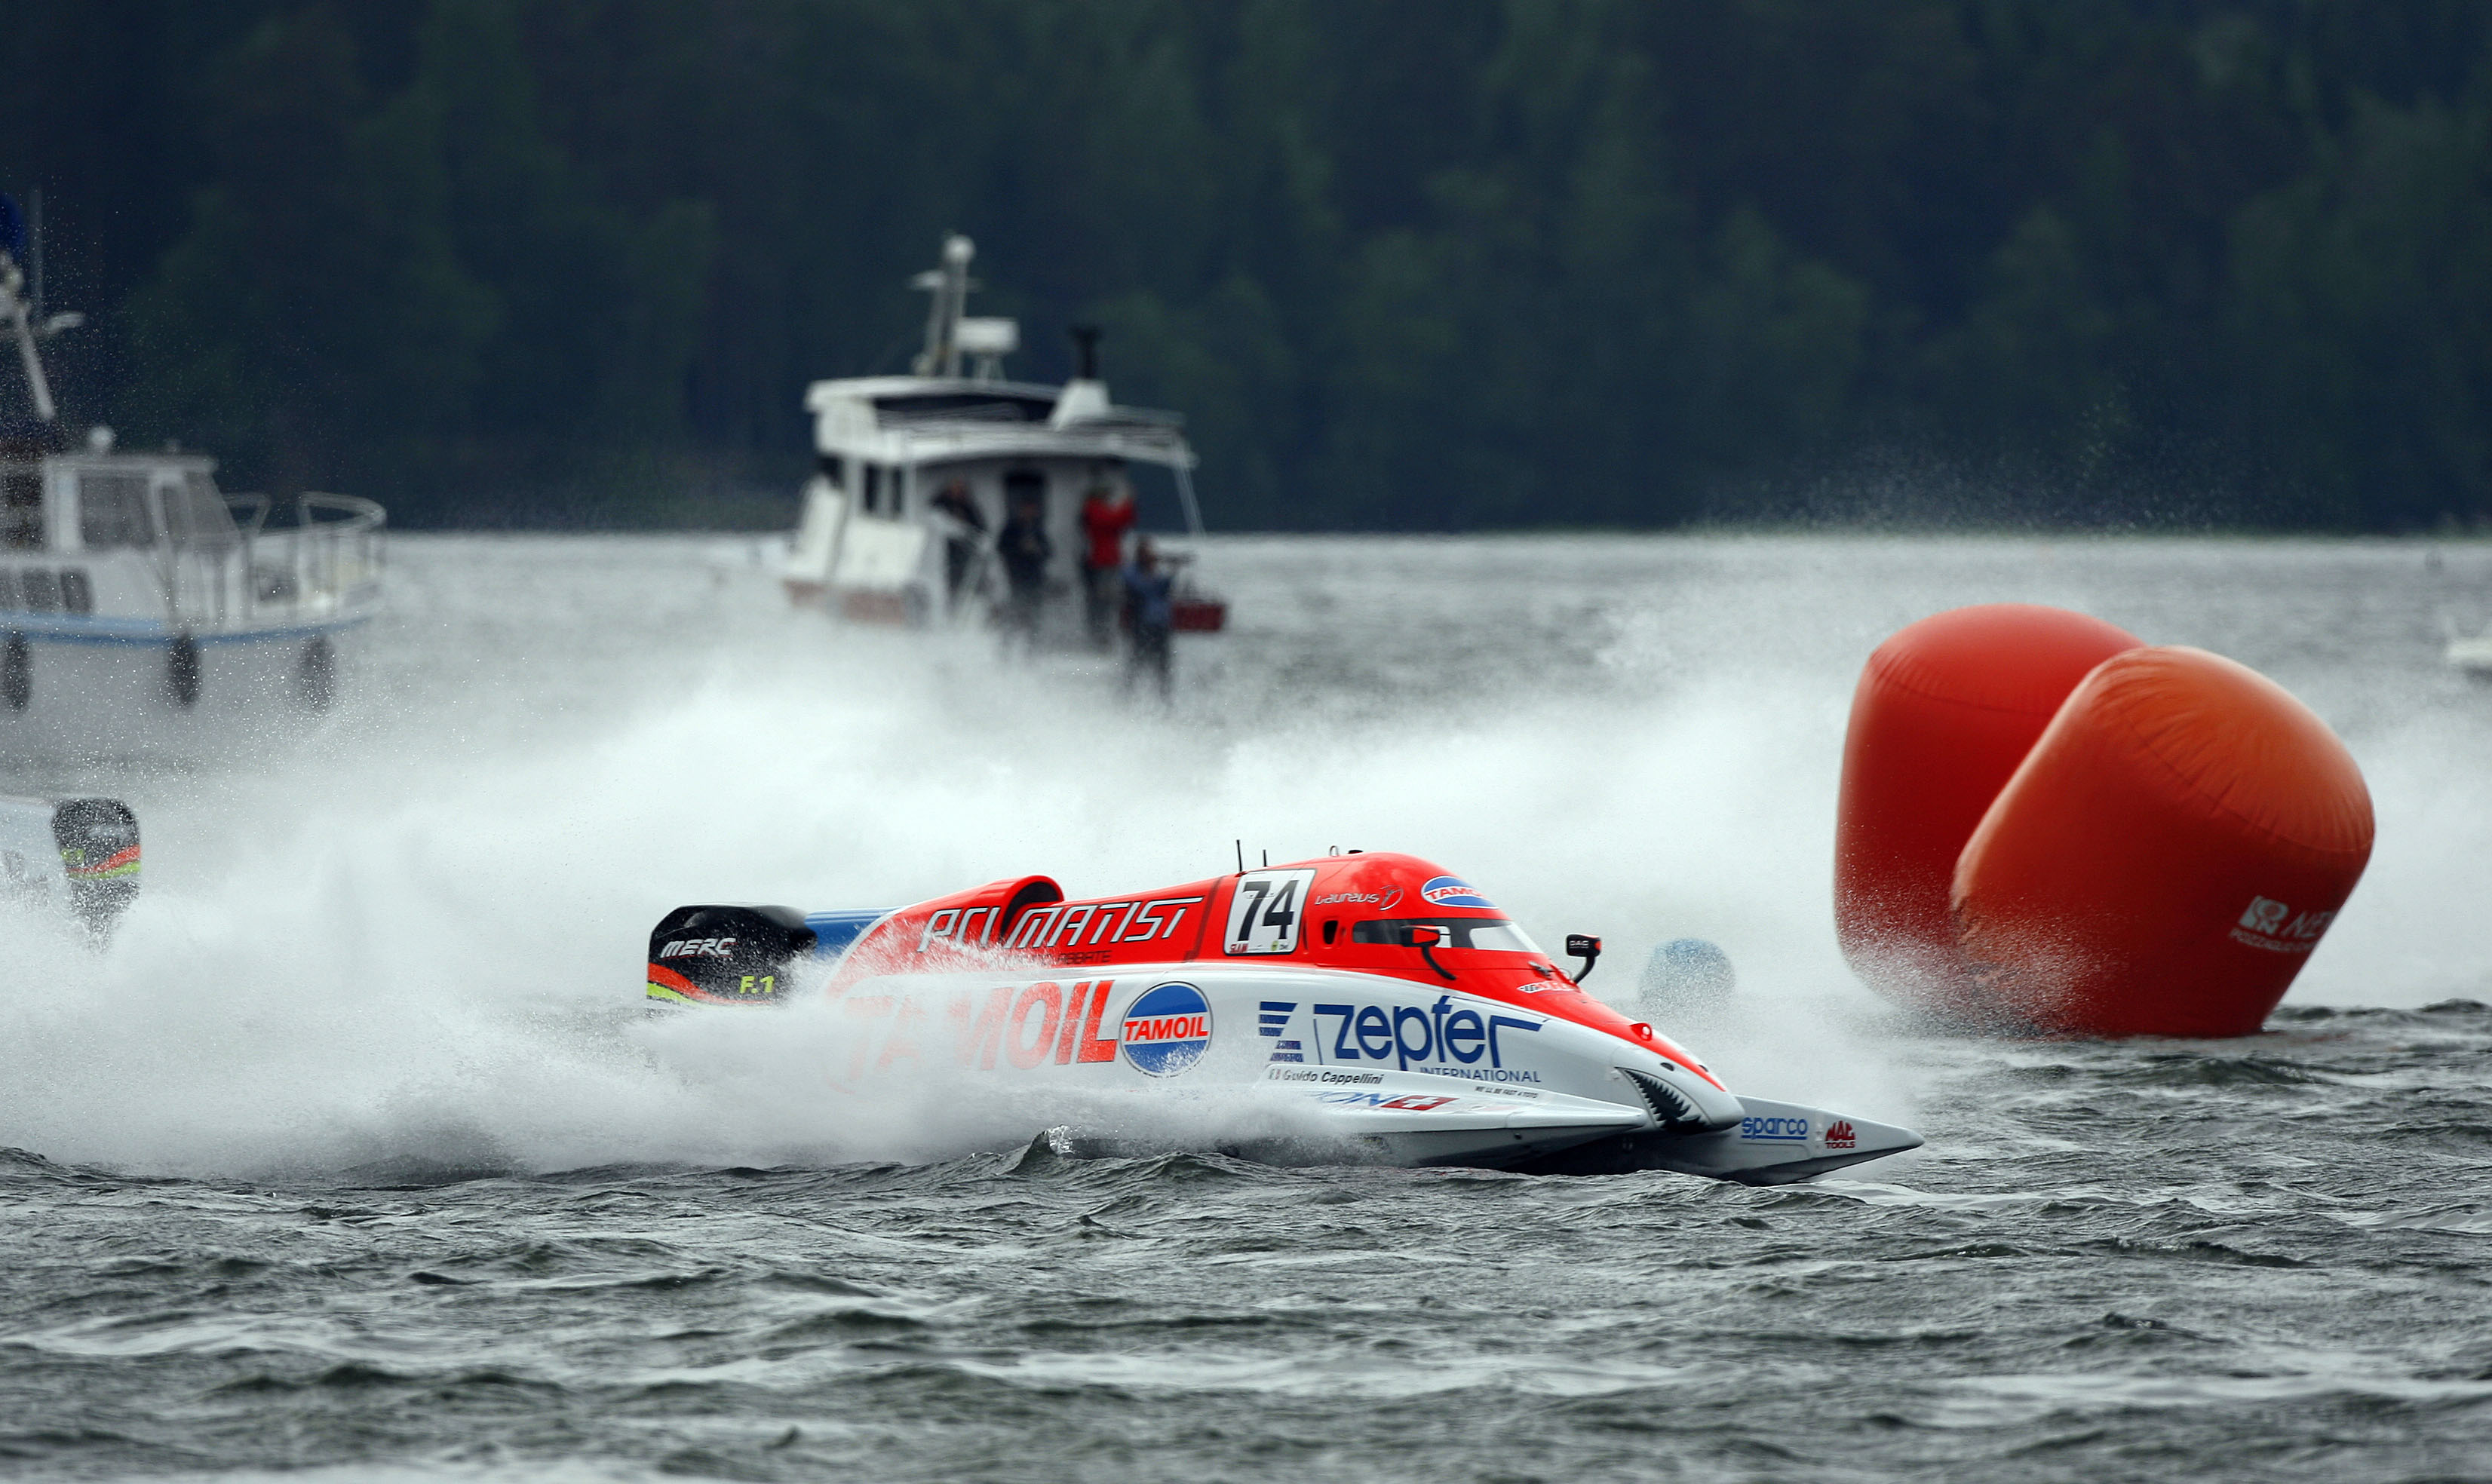 080608-GP OF FINLAND-Guido Cappellini of Italy of the Tamoil team in action the UIM F1 powerboat at the Grand Prix of Finland on Lake Lahti, June 8, 2008. Picture by Paul Lakatos/Idea Marketing.